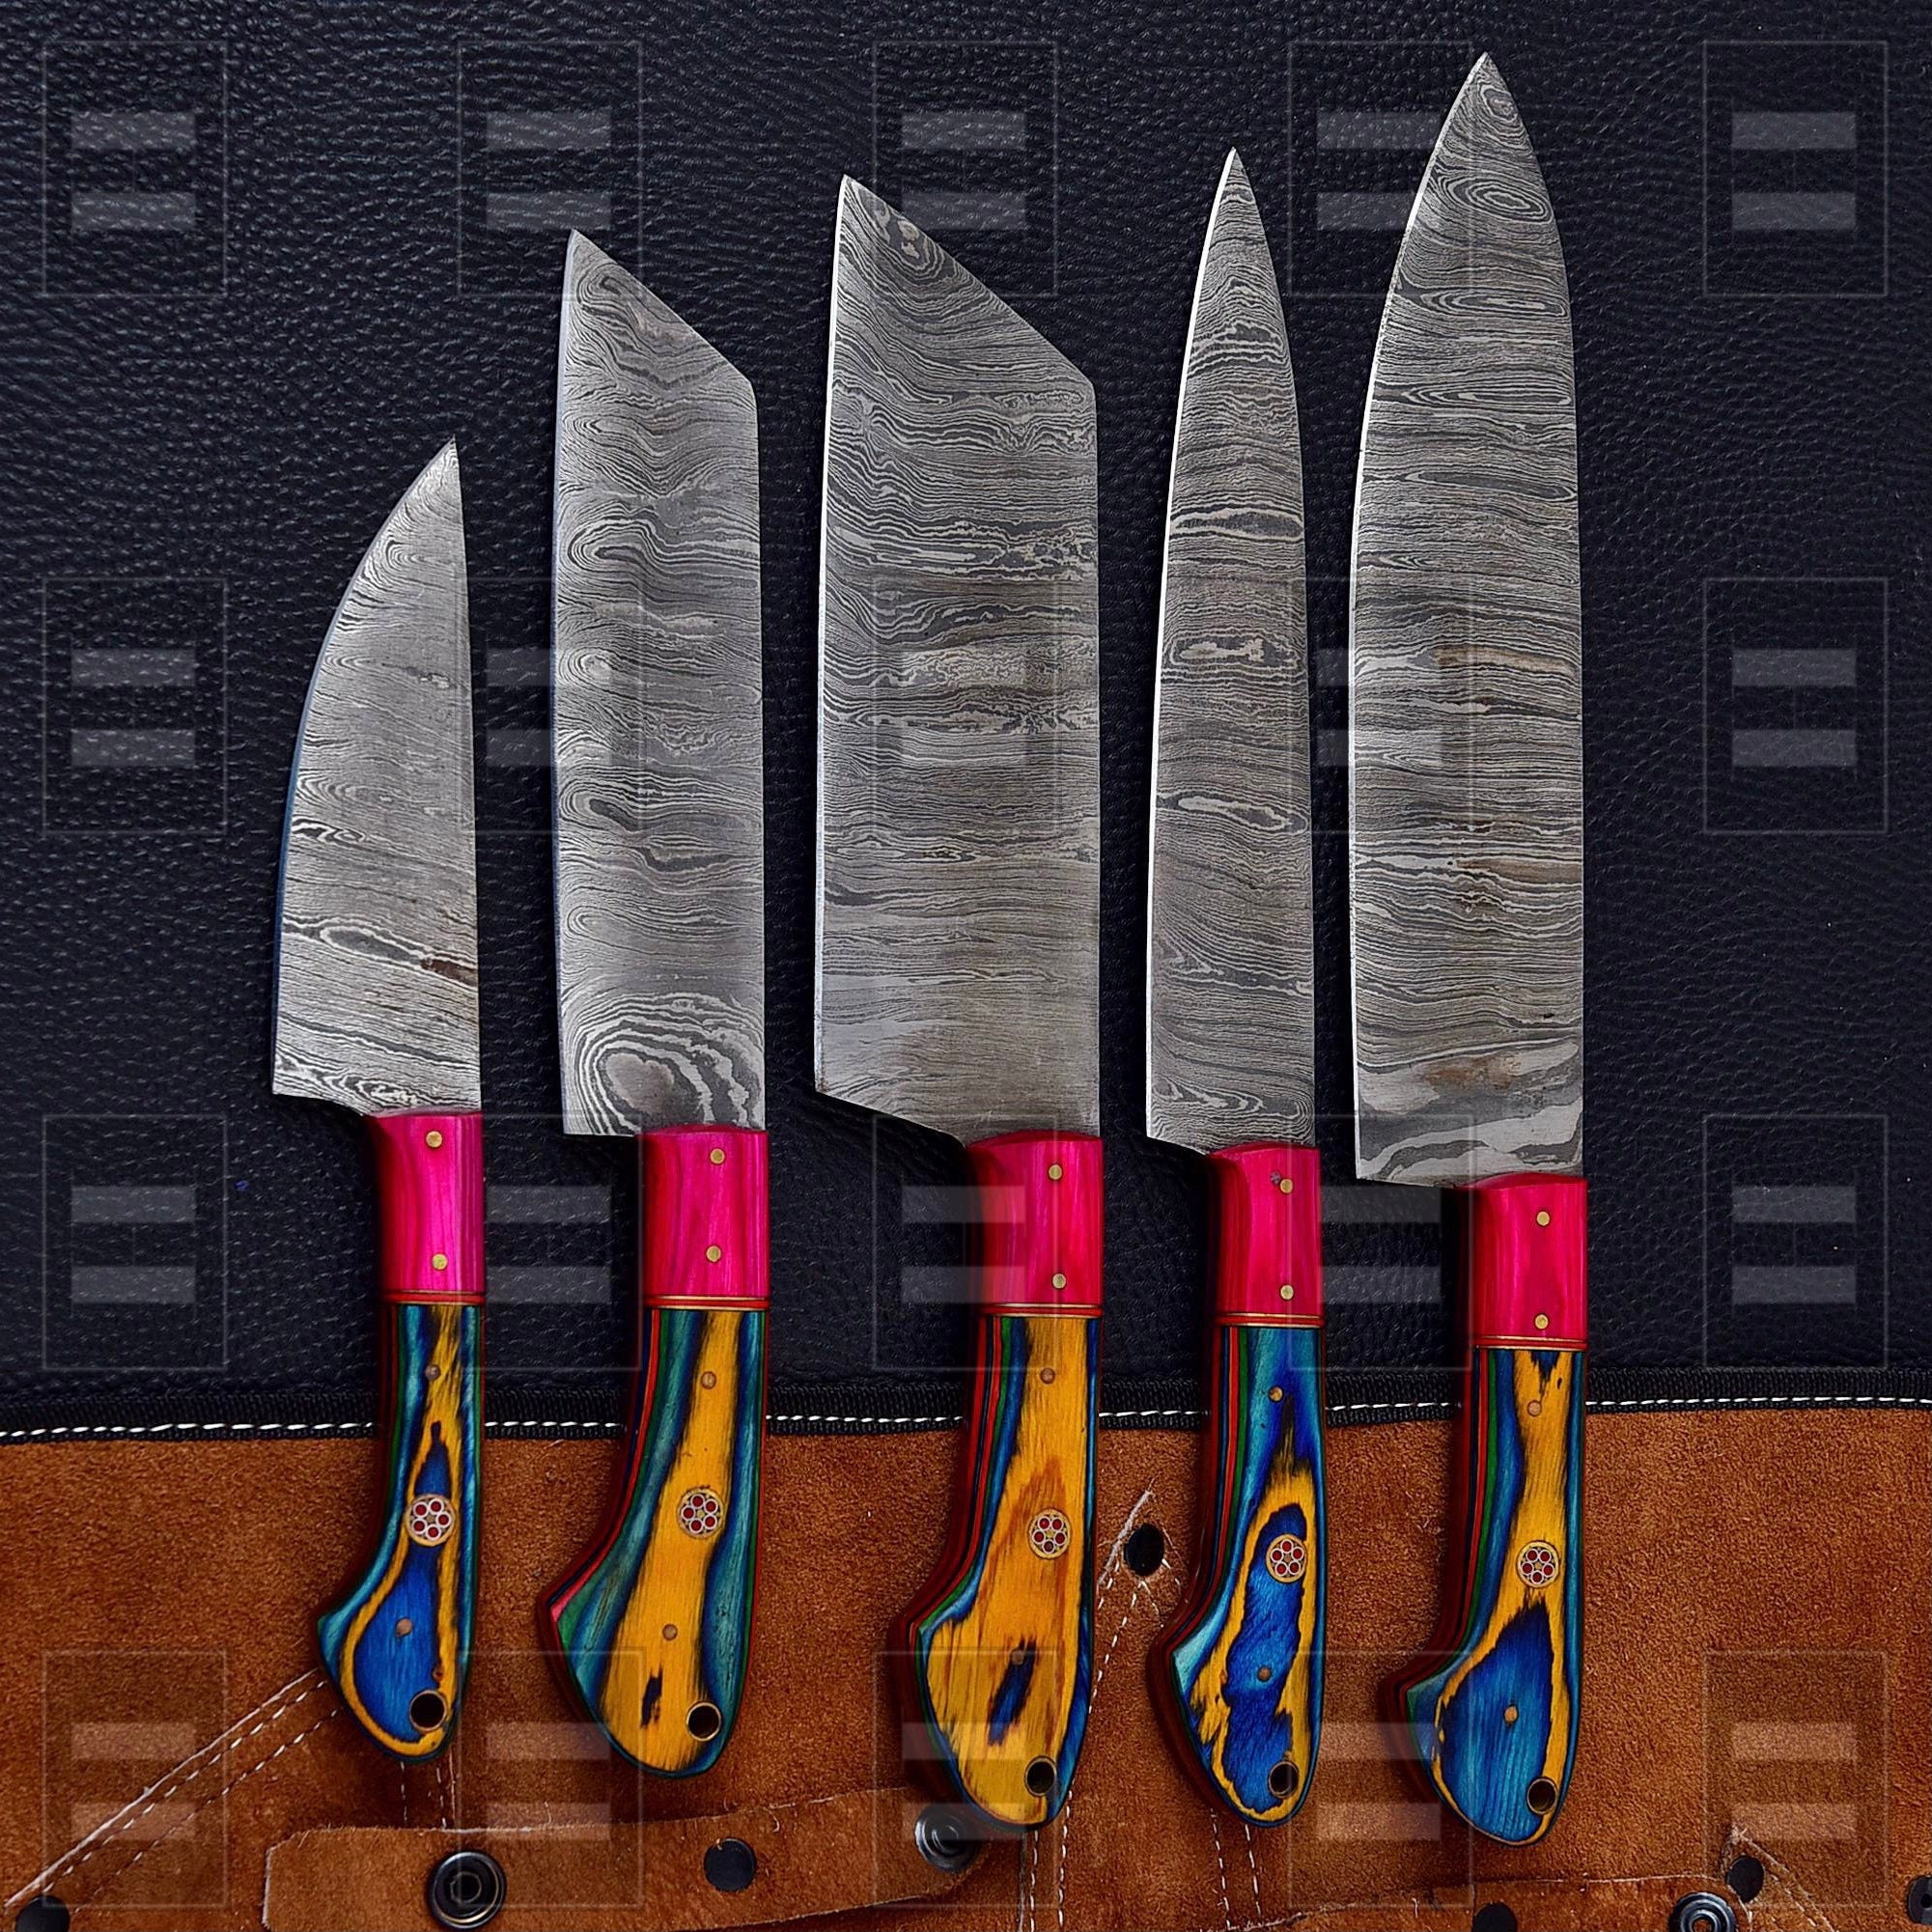 Custom made hand forged Damascus steel full tang blade kitchen knife set,  Overall 45 inches Length of Damascus sharp knives (10.6+9.6+9.0+8.0+7.6)